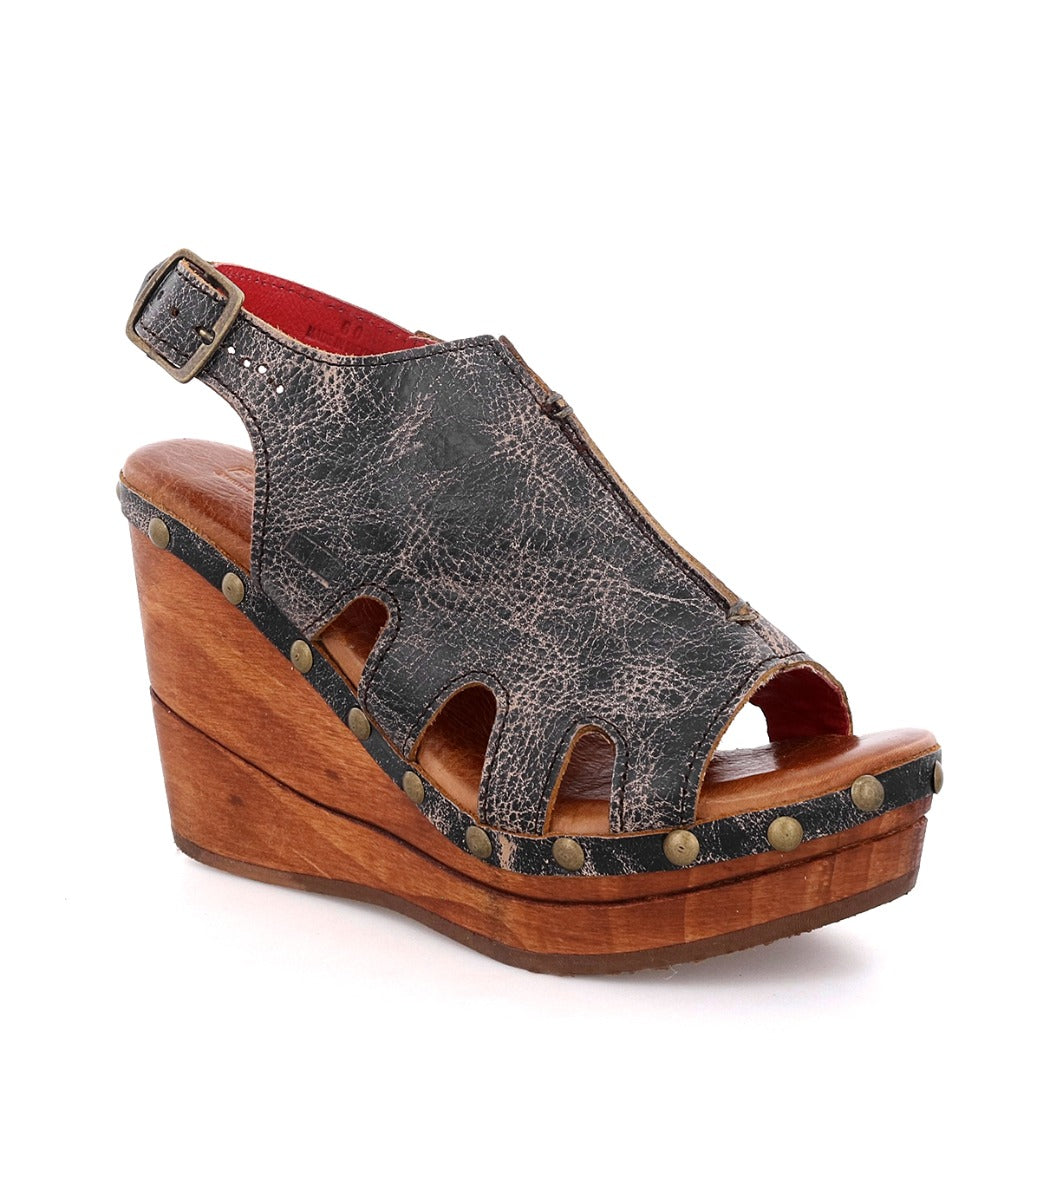 A women's black wedge sandal with a wooden platform by Bed Stu.